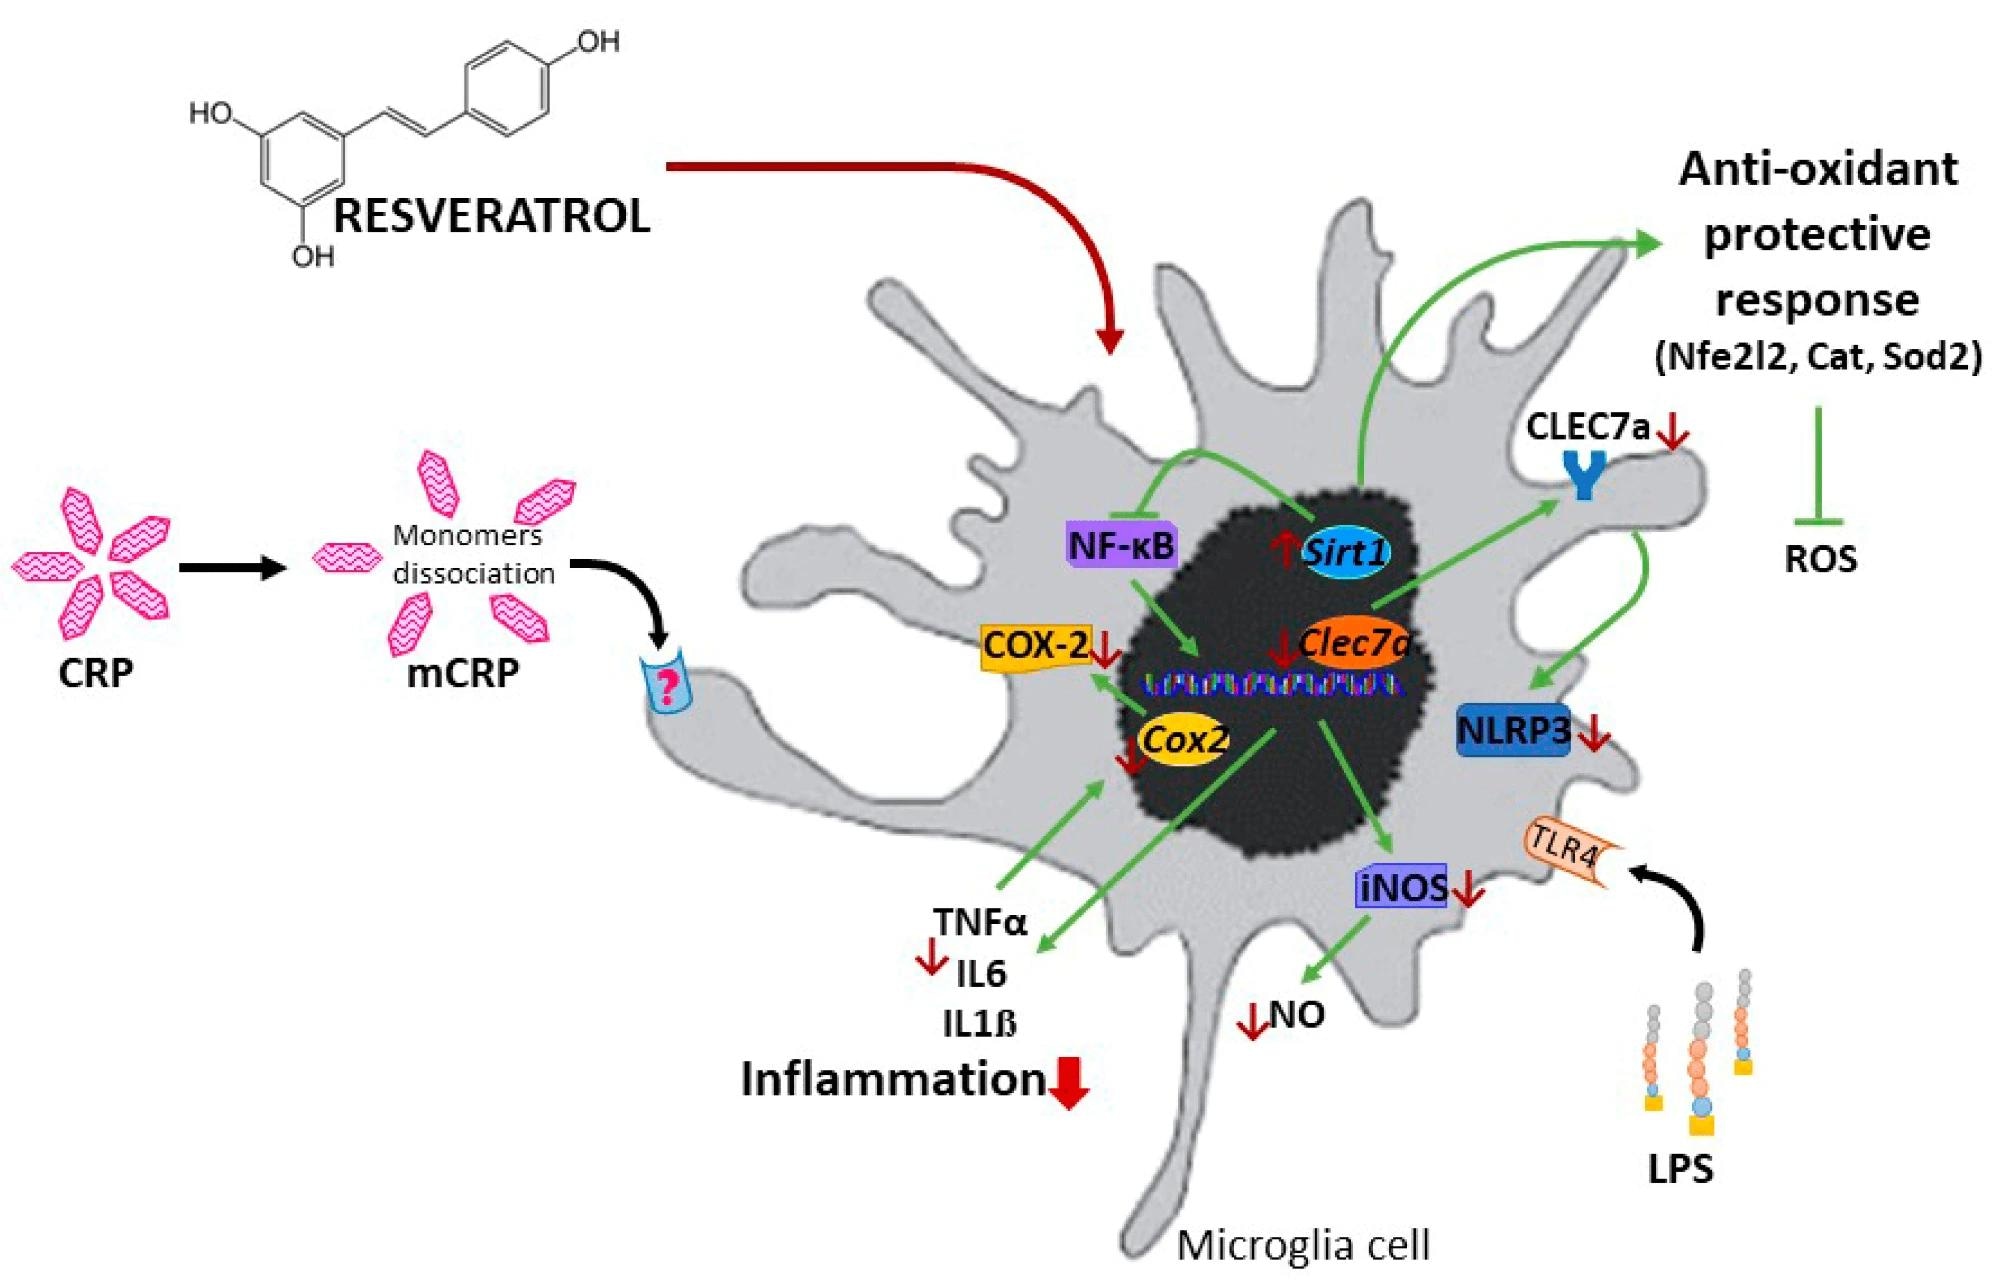 Schematic representation of the protective mechanisms of resveratrol against the proinflammatory agents mCRP and LPS.